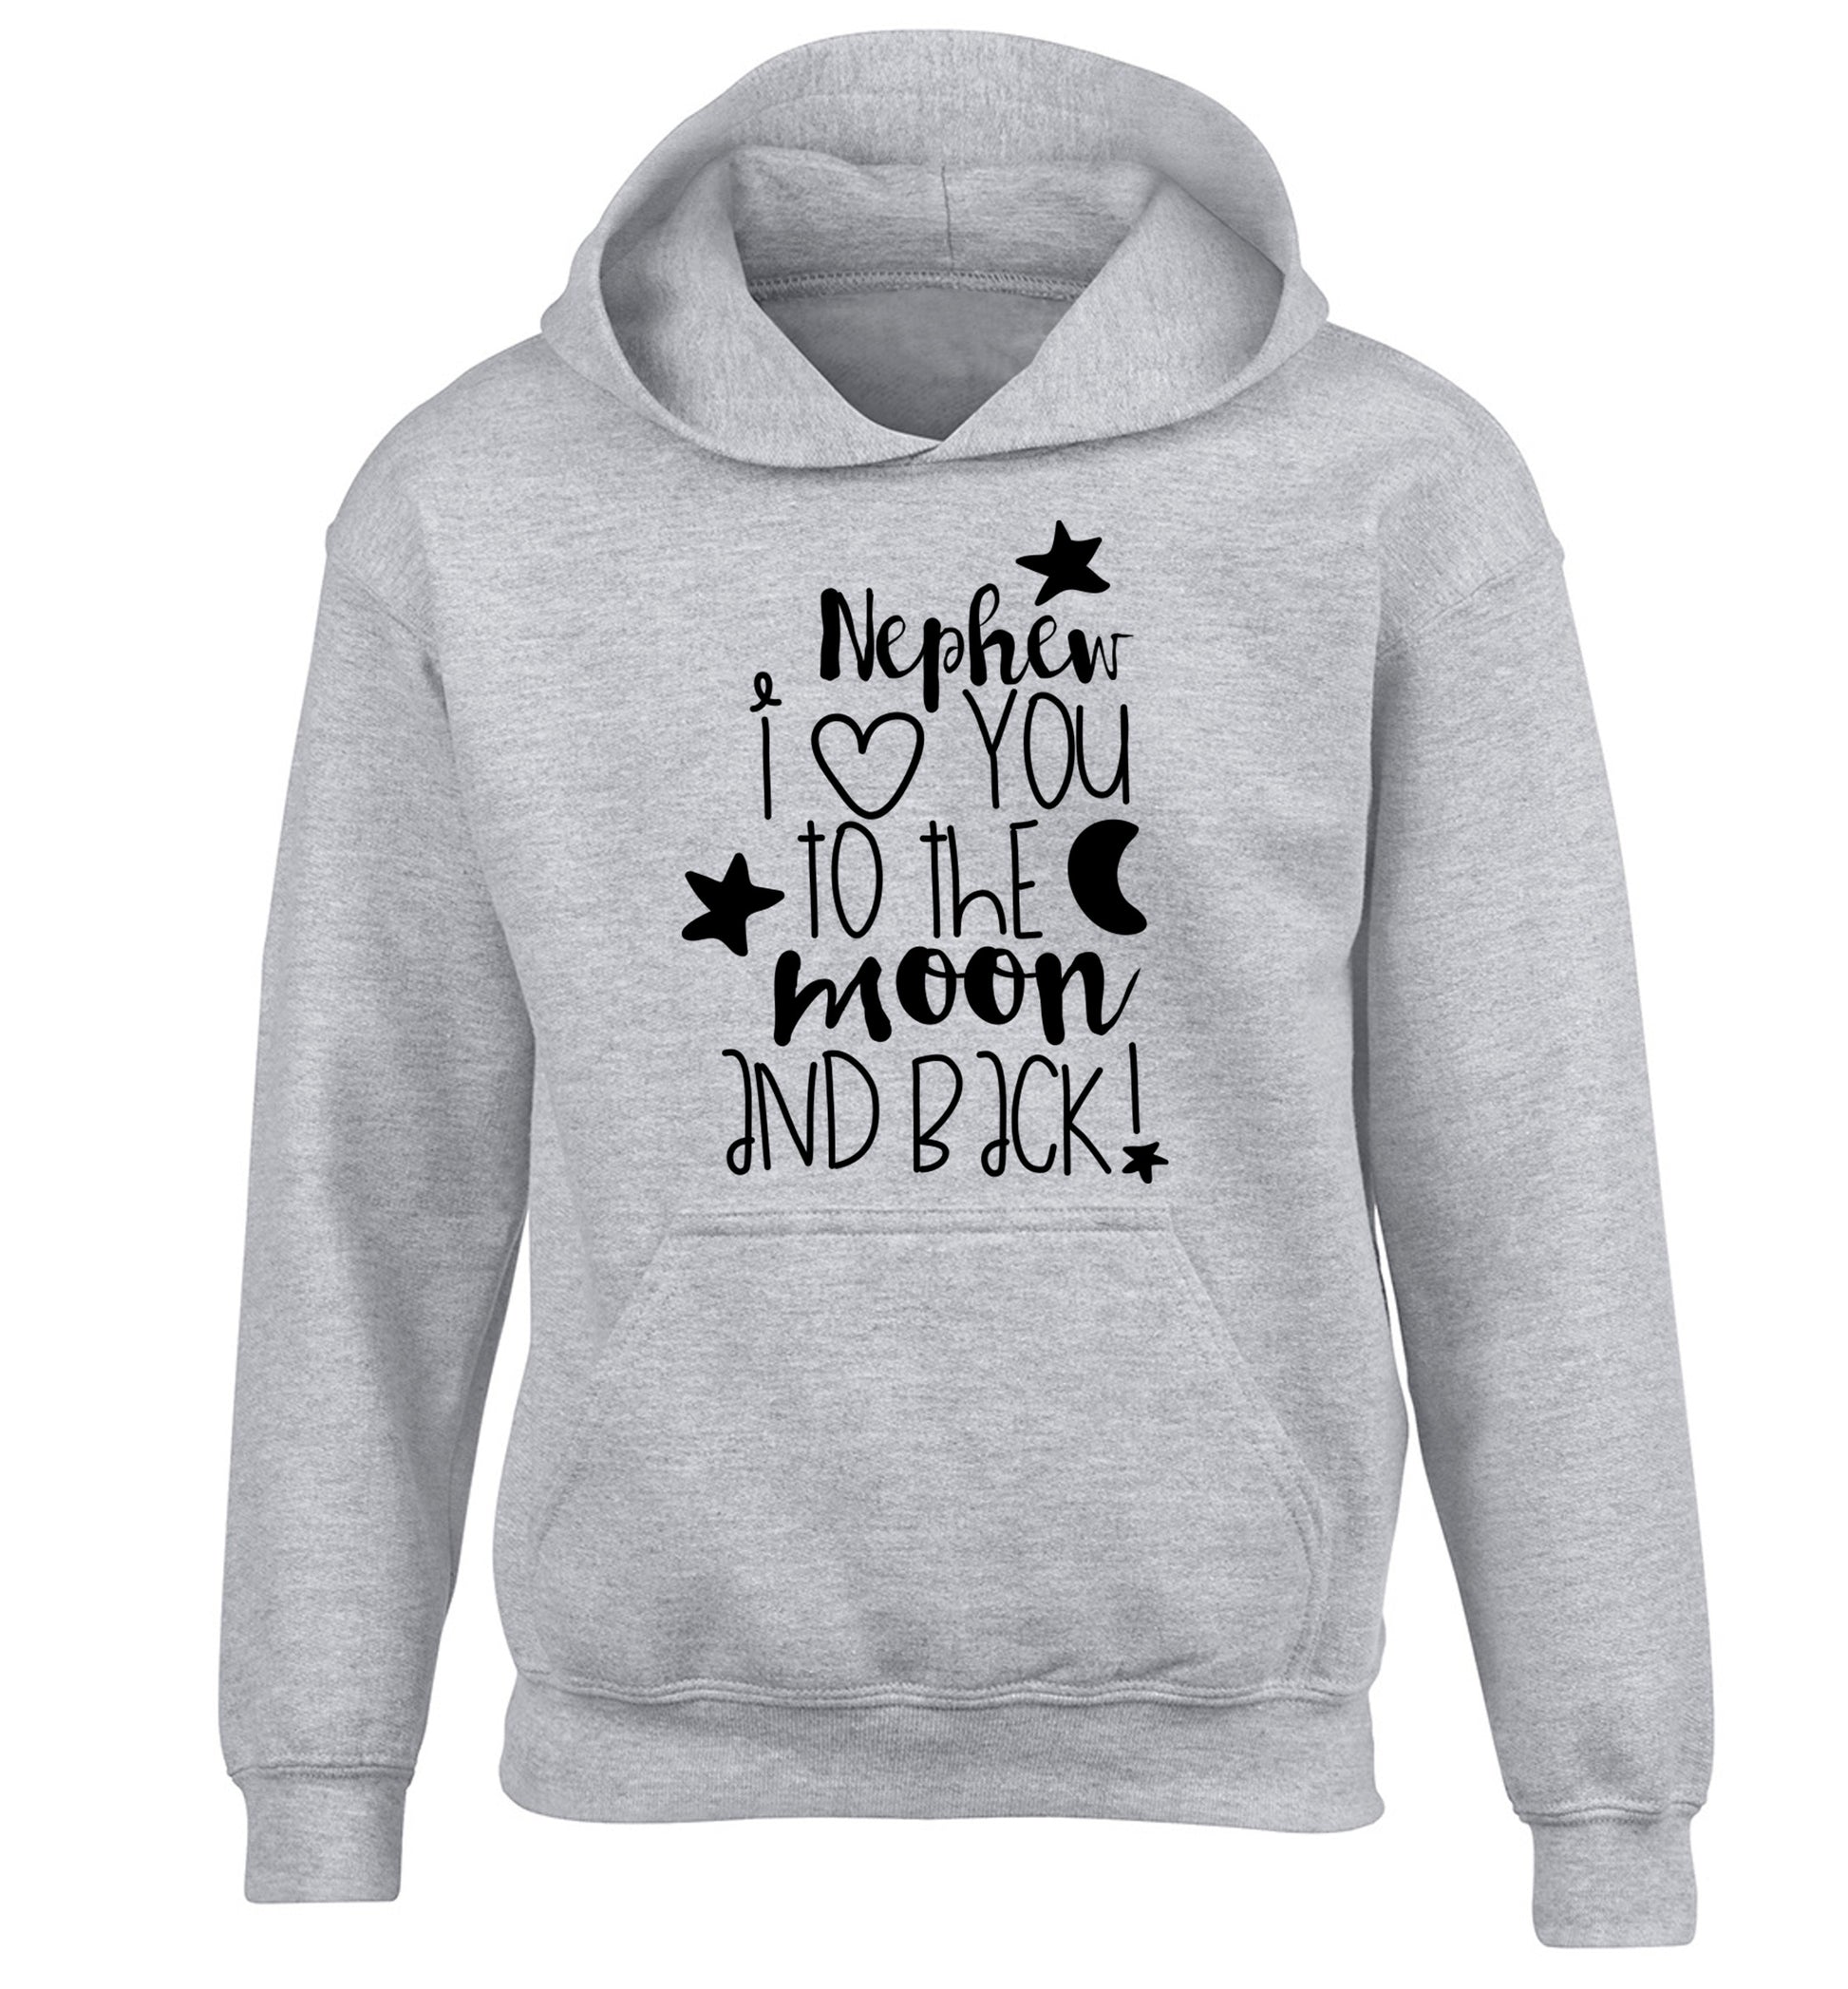 Nephew I love you to the moon and back children's grey hoodie 12-14 Years